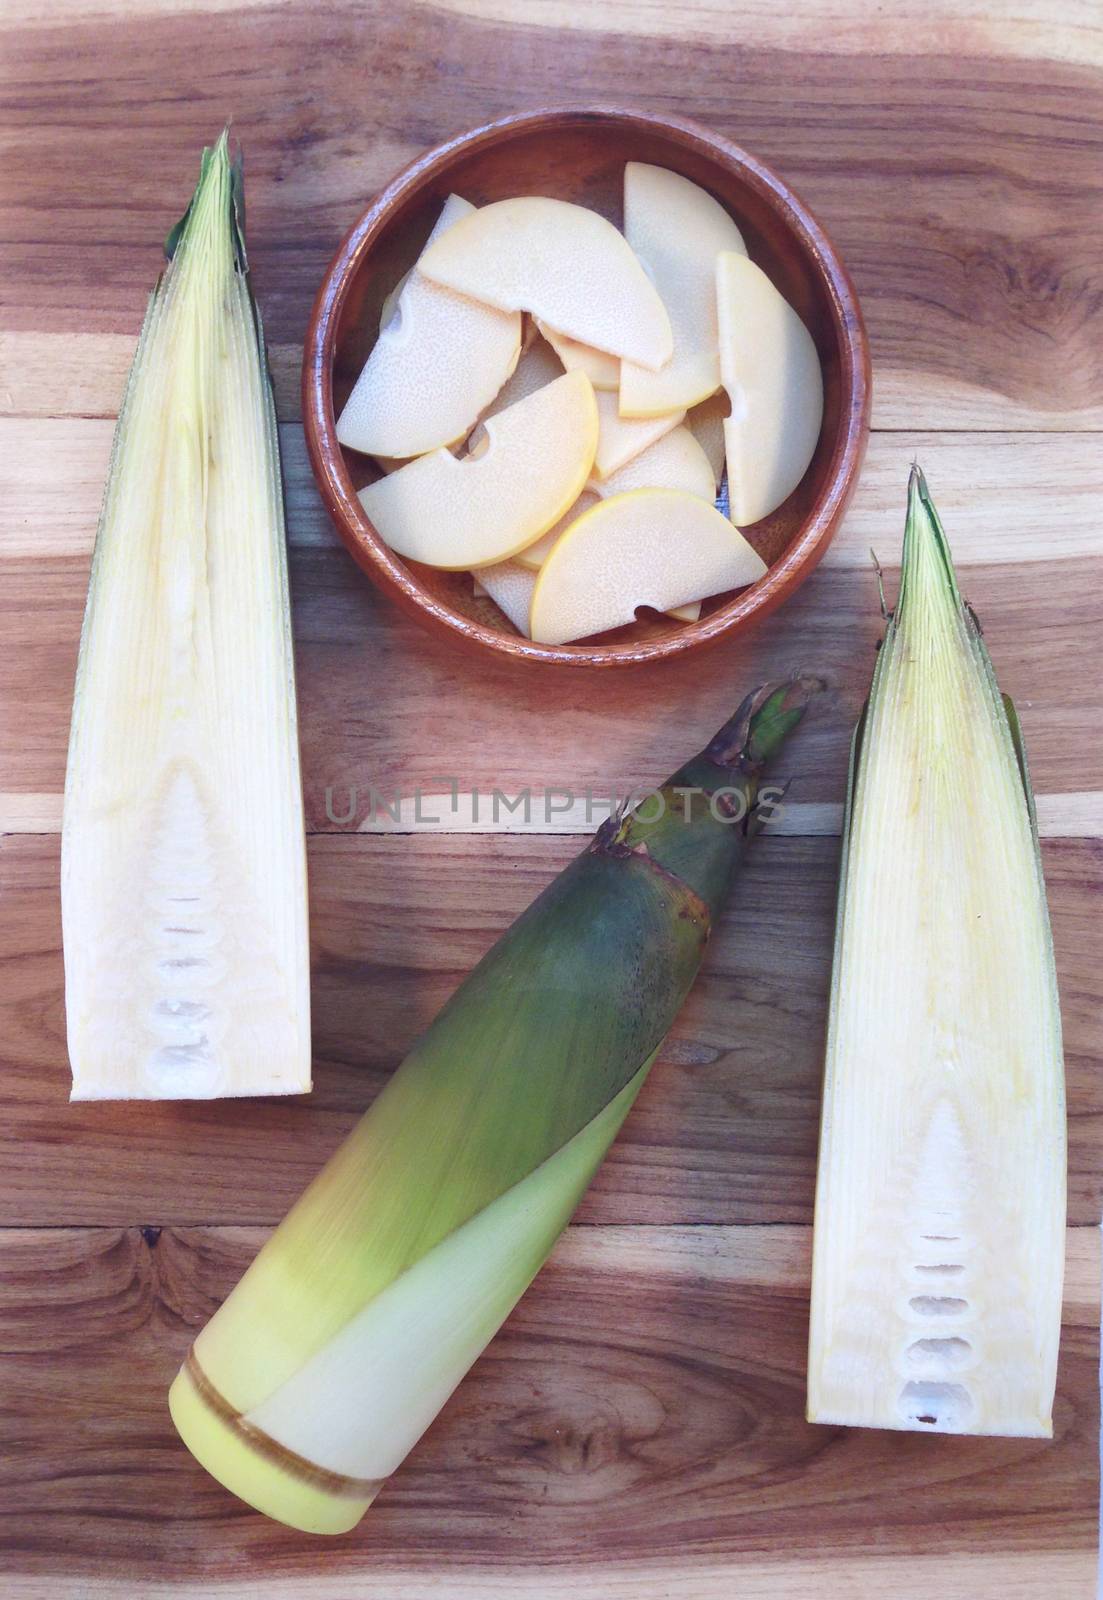 Bamboo shoots and Bamboo shoots slices in wooden bowl on wooden background